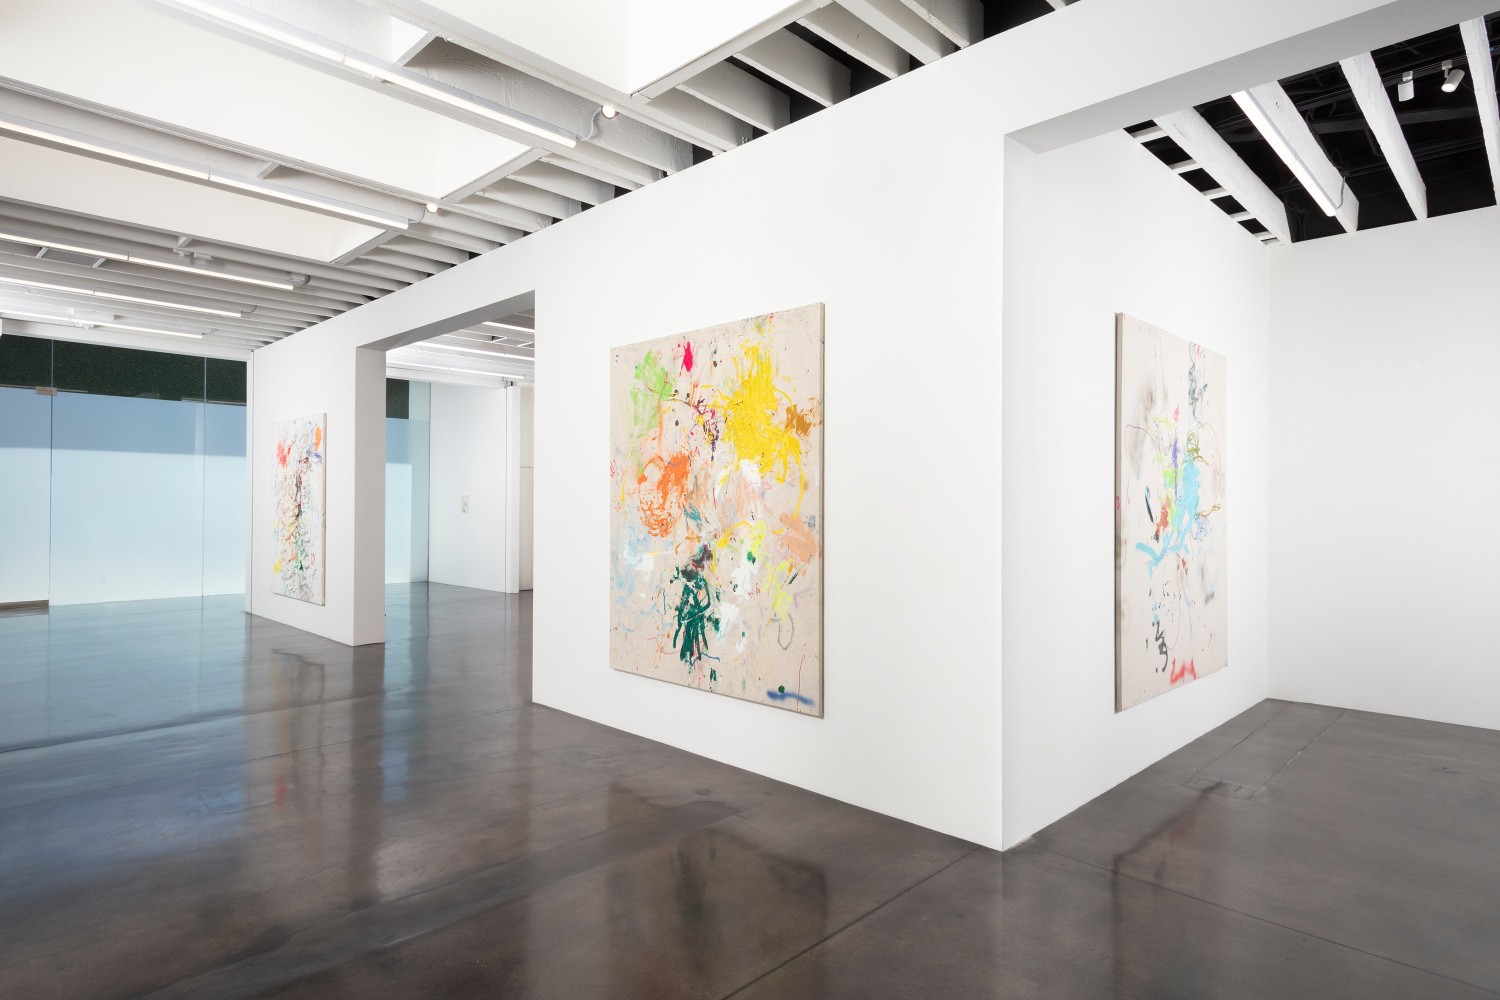 Dan Flanagan: Ash of a Flame That Burns Well (installation view)